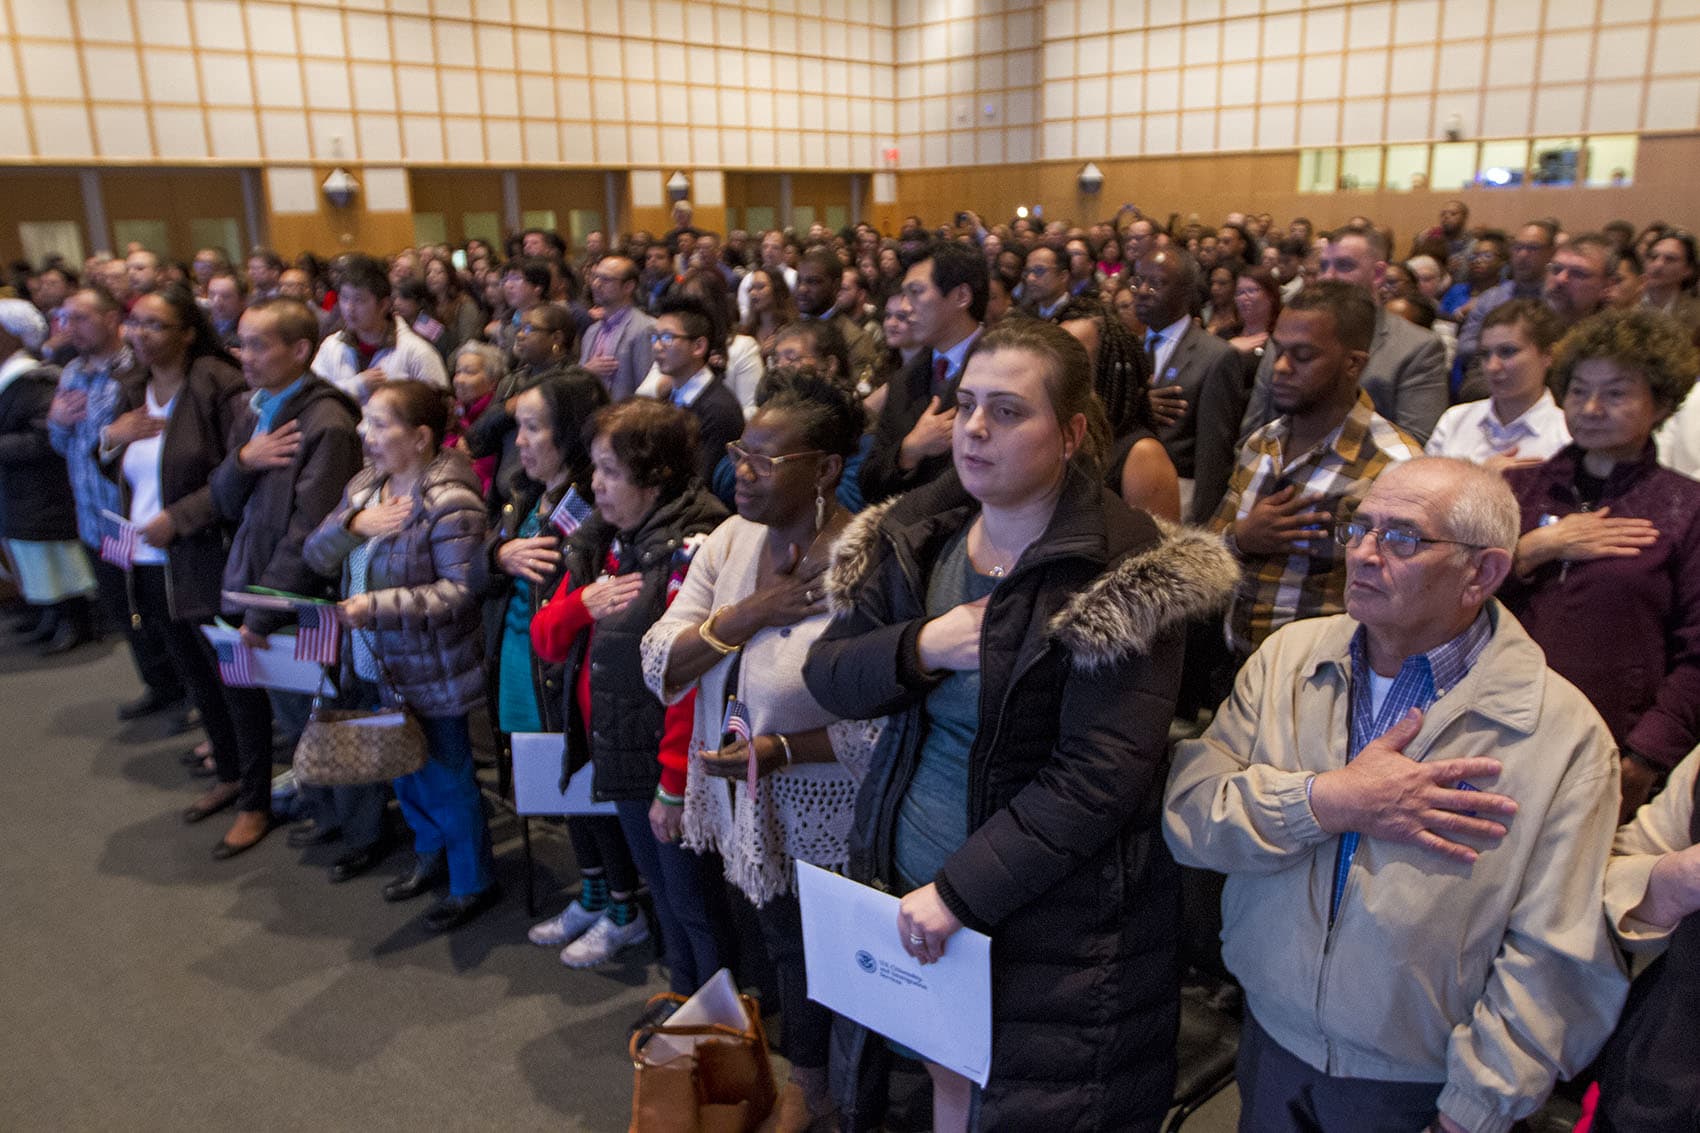 New citizens recite the Pledge Of Allegiance during a ceremony at the Boston's JFK Library on Thursday. (Jesse Costa/WBUR)